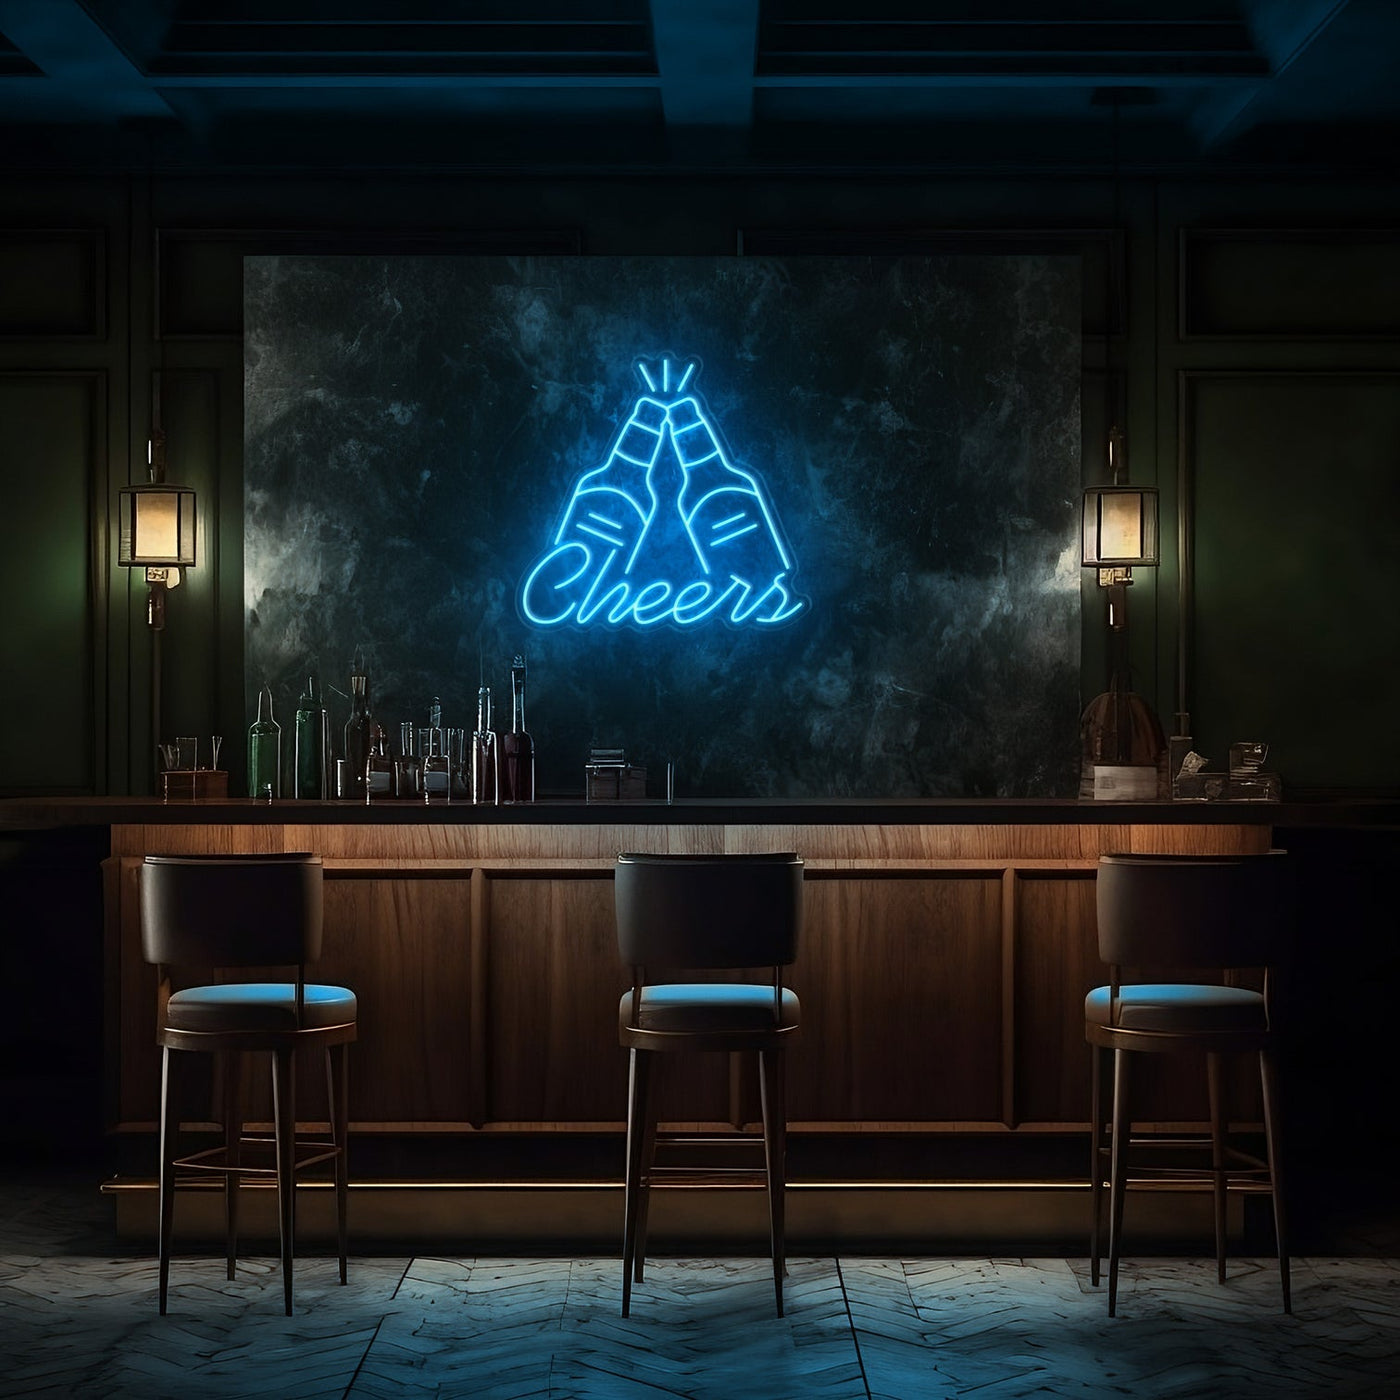 Cheers LED Neon Sign - 20 InchIce Blue